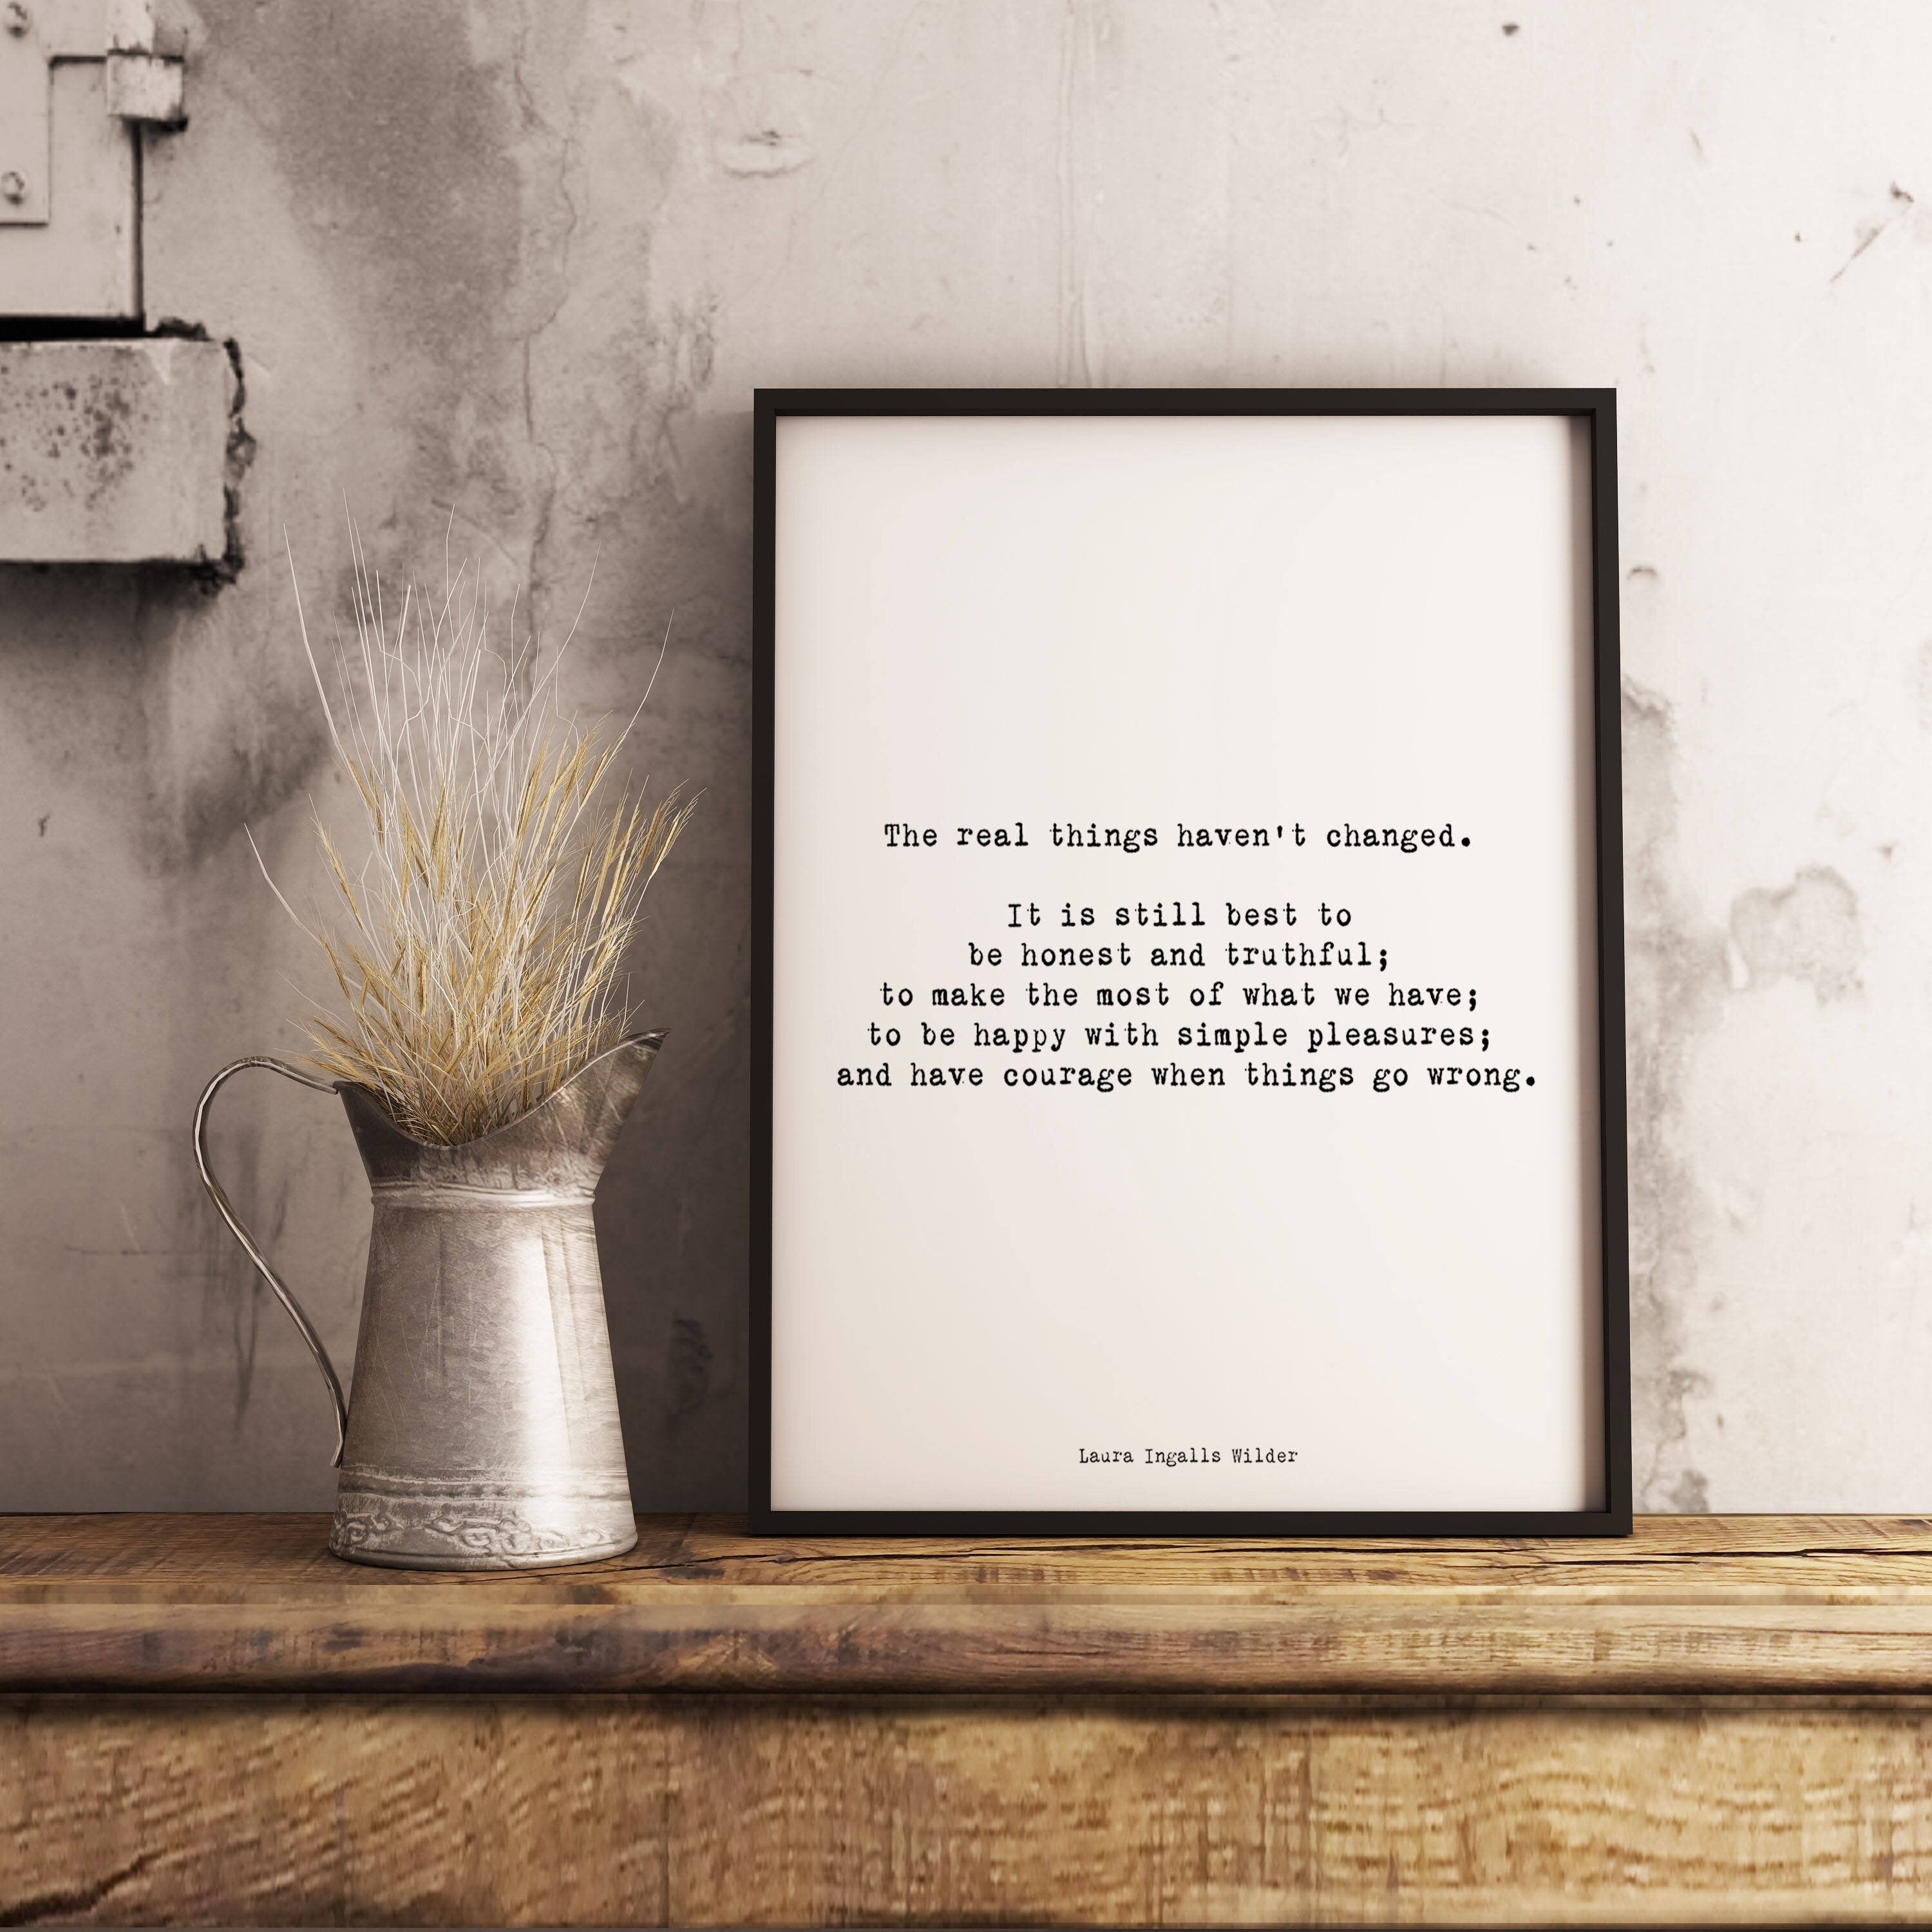 Laura Ingalls Wilder Inspirational Quote Framed Art In Black & White, The Real Things Haven't Changed